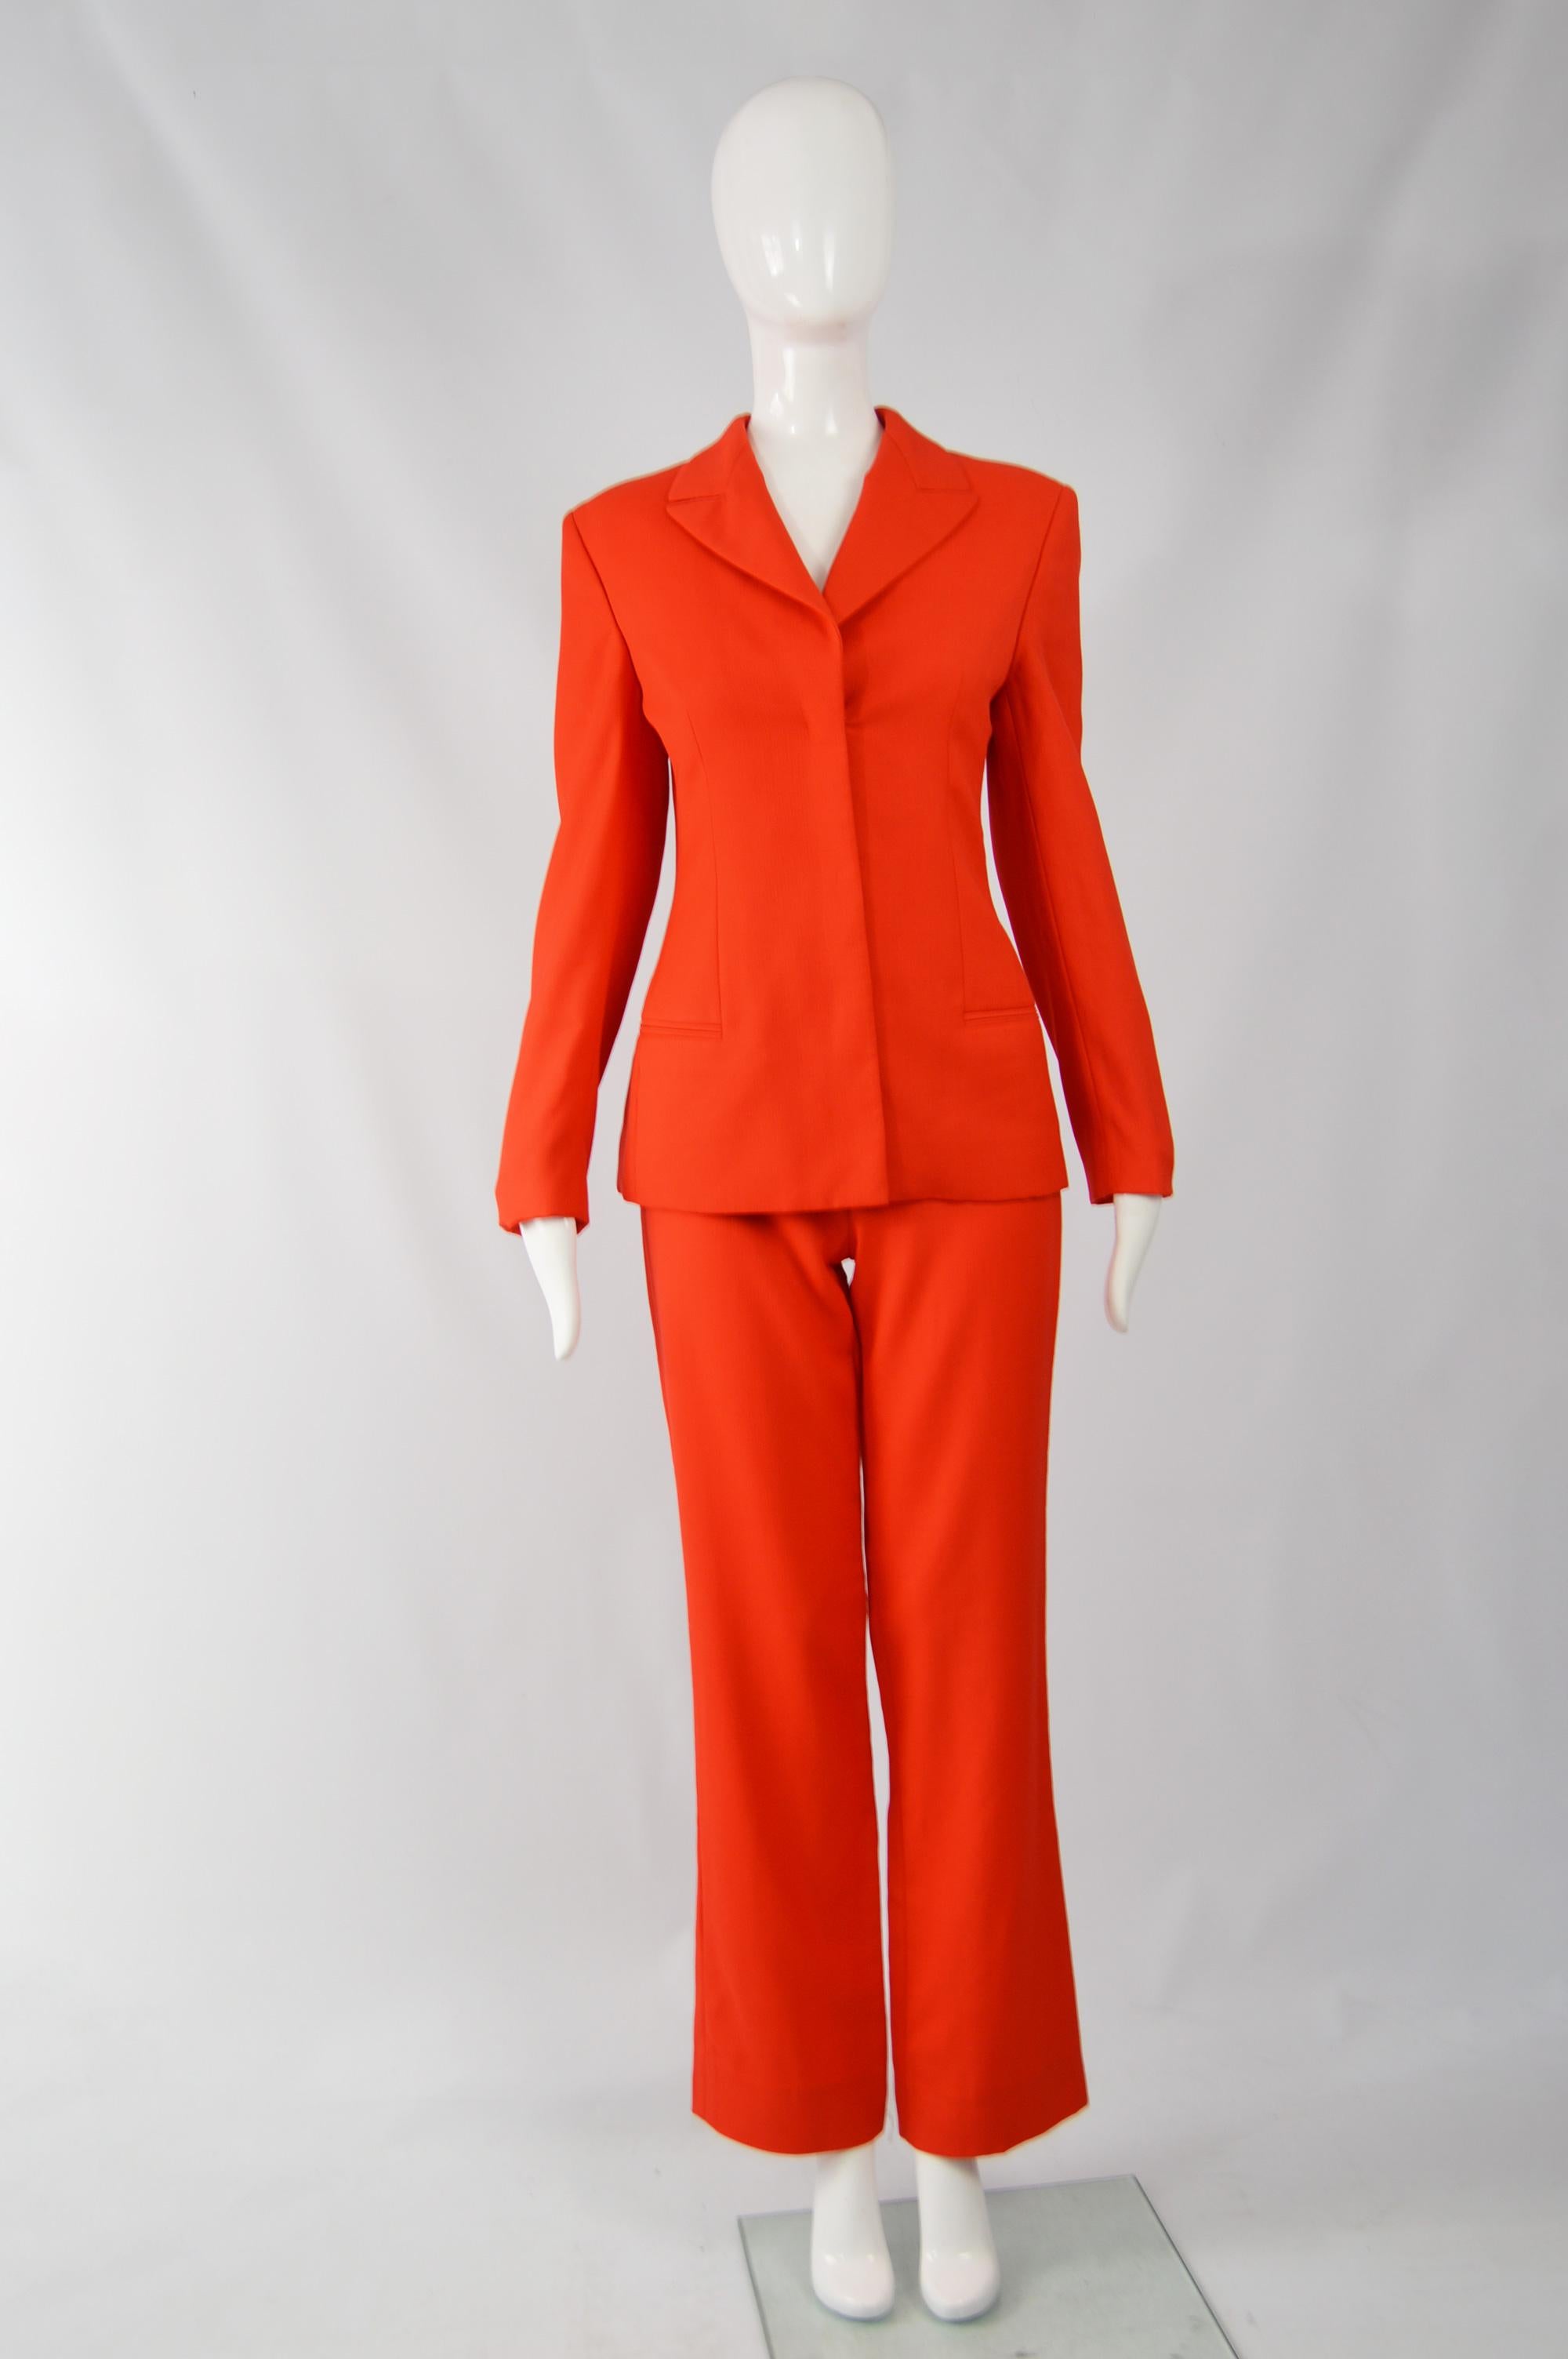 Size: Jacket Unmarked; Trousers are IT40 which translates to a UK 8/ US 4/ EU 36. Please check measurements. 
Bust - 34” / 86cm
Waist (of pants) - 27” / 68cm
Waist (of jacket) 28” / 71cm
Length of jacket (Shoulder to Hem) - 24” / 61cm
Shoulder to